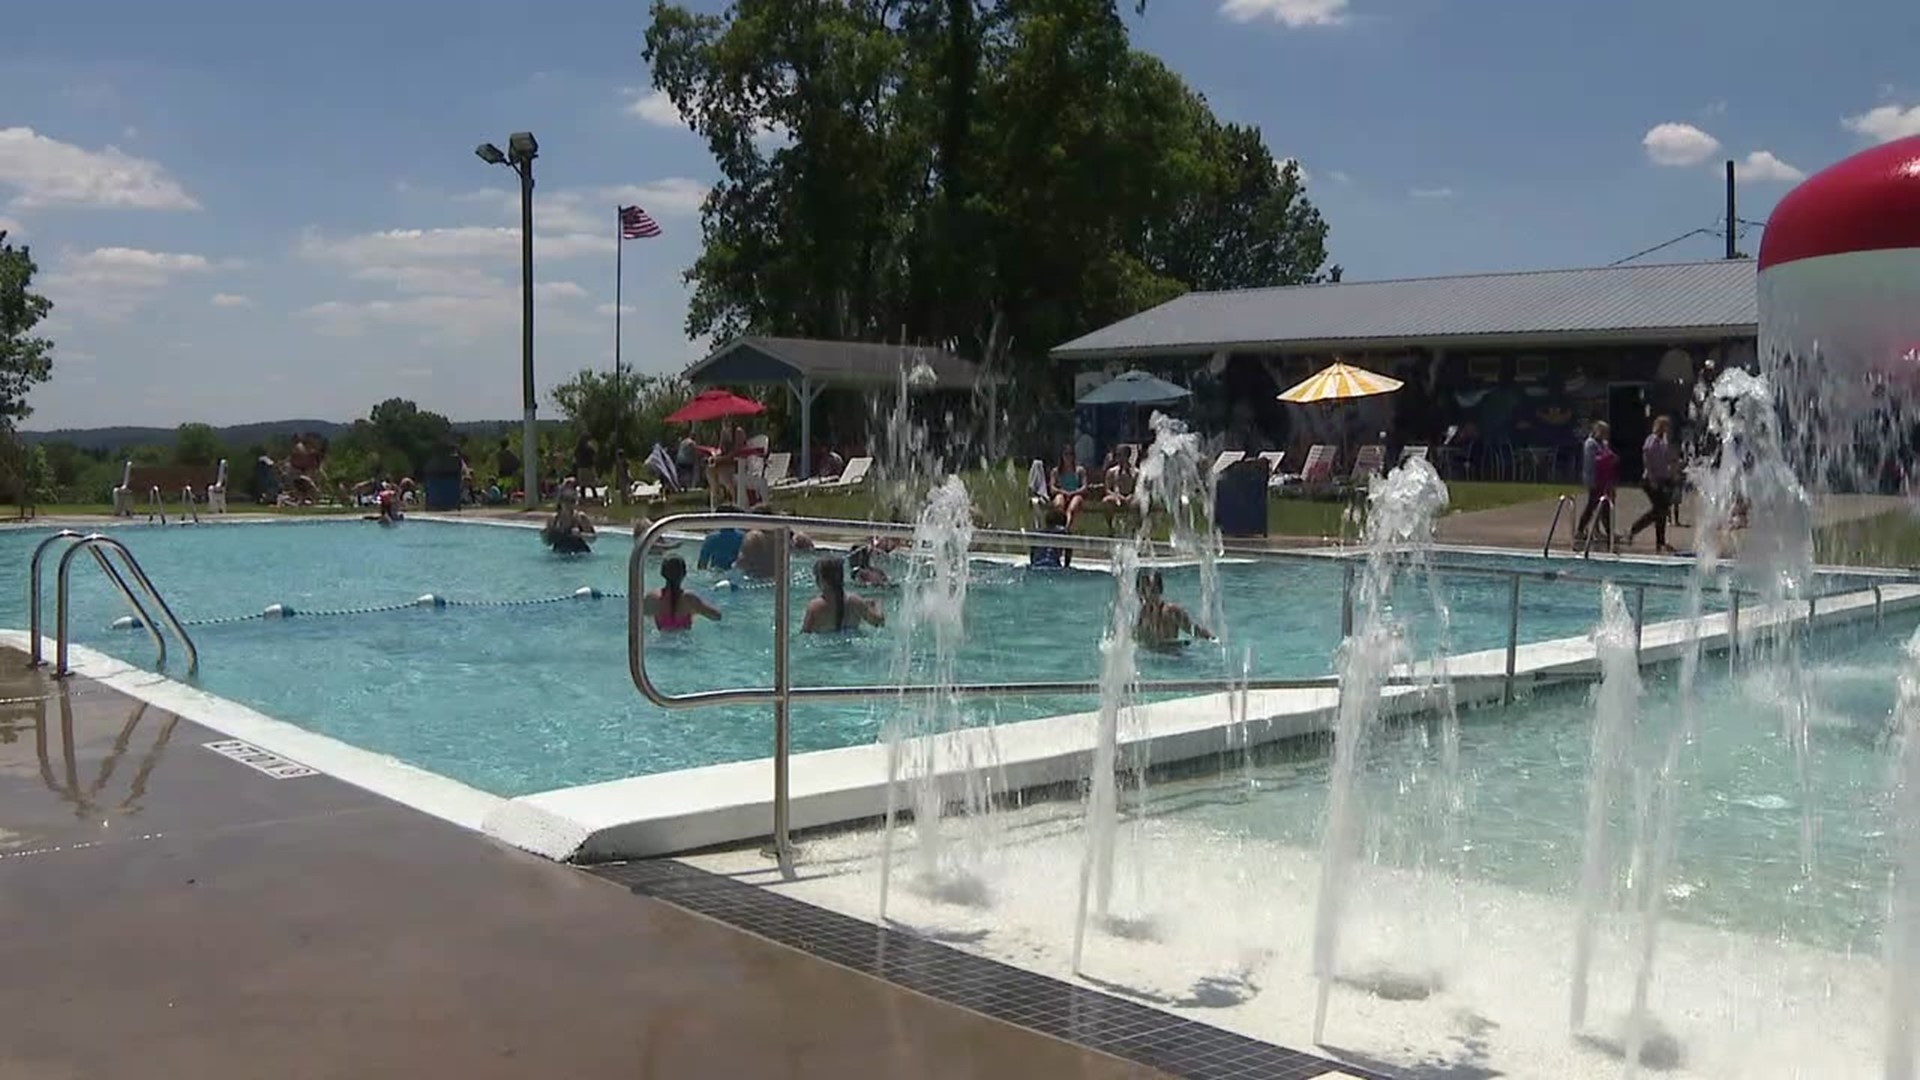 While many community pools have not reopened after the COVID-19 pandemic, swimmers are welcome at the community swimming pool in Selinsgrove.